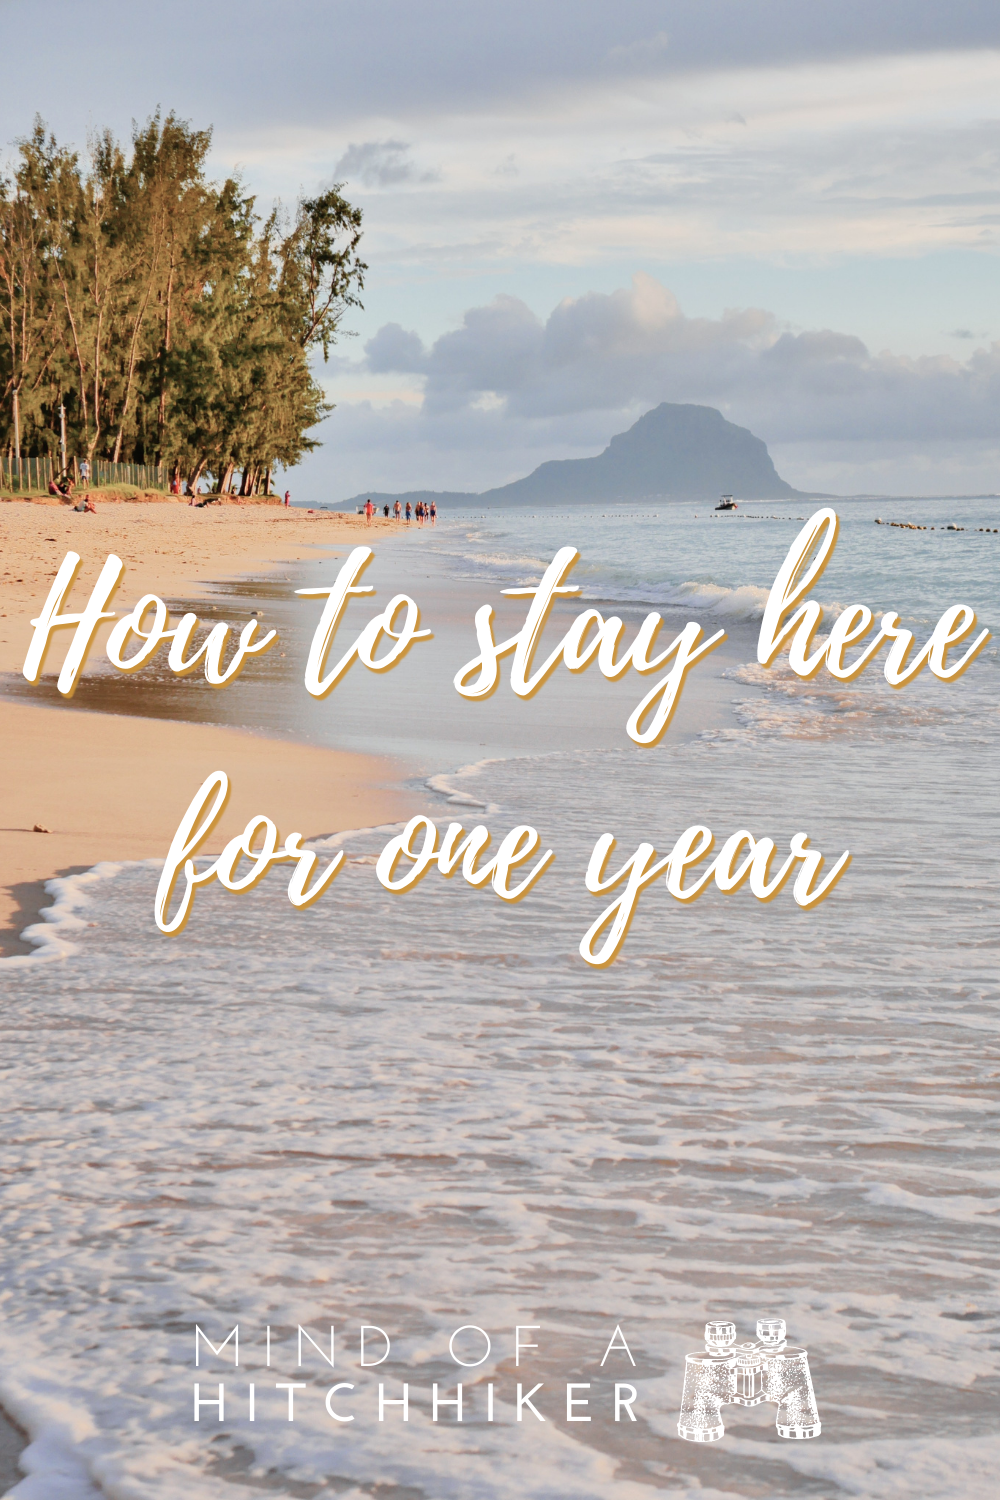 how to stay in mauritius for one year